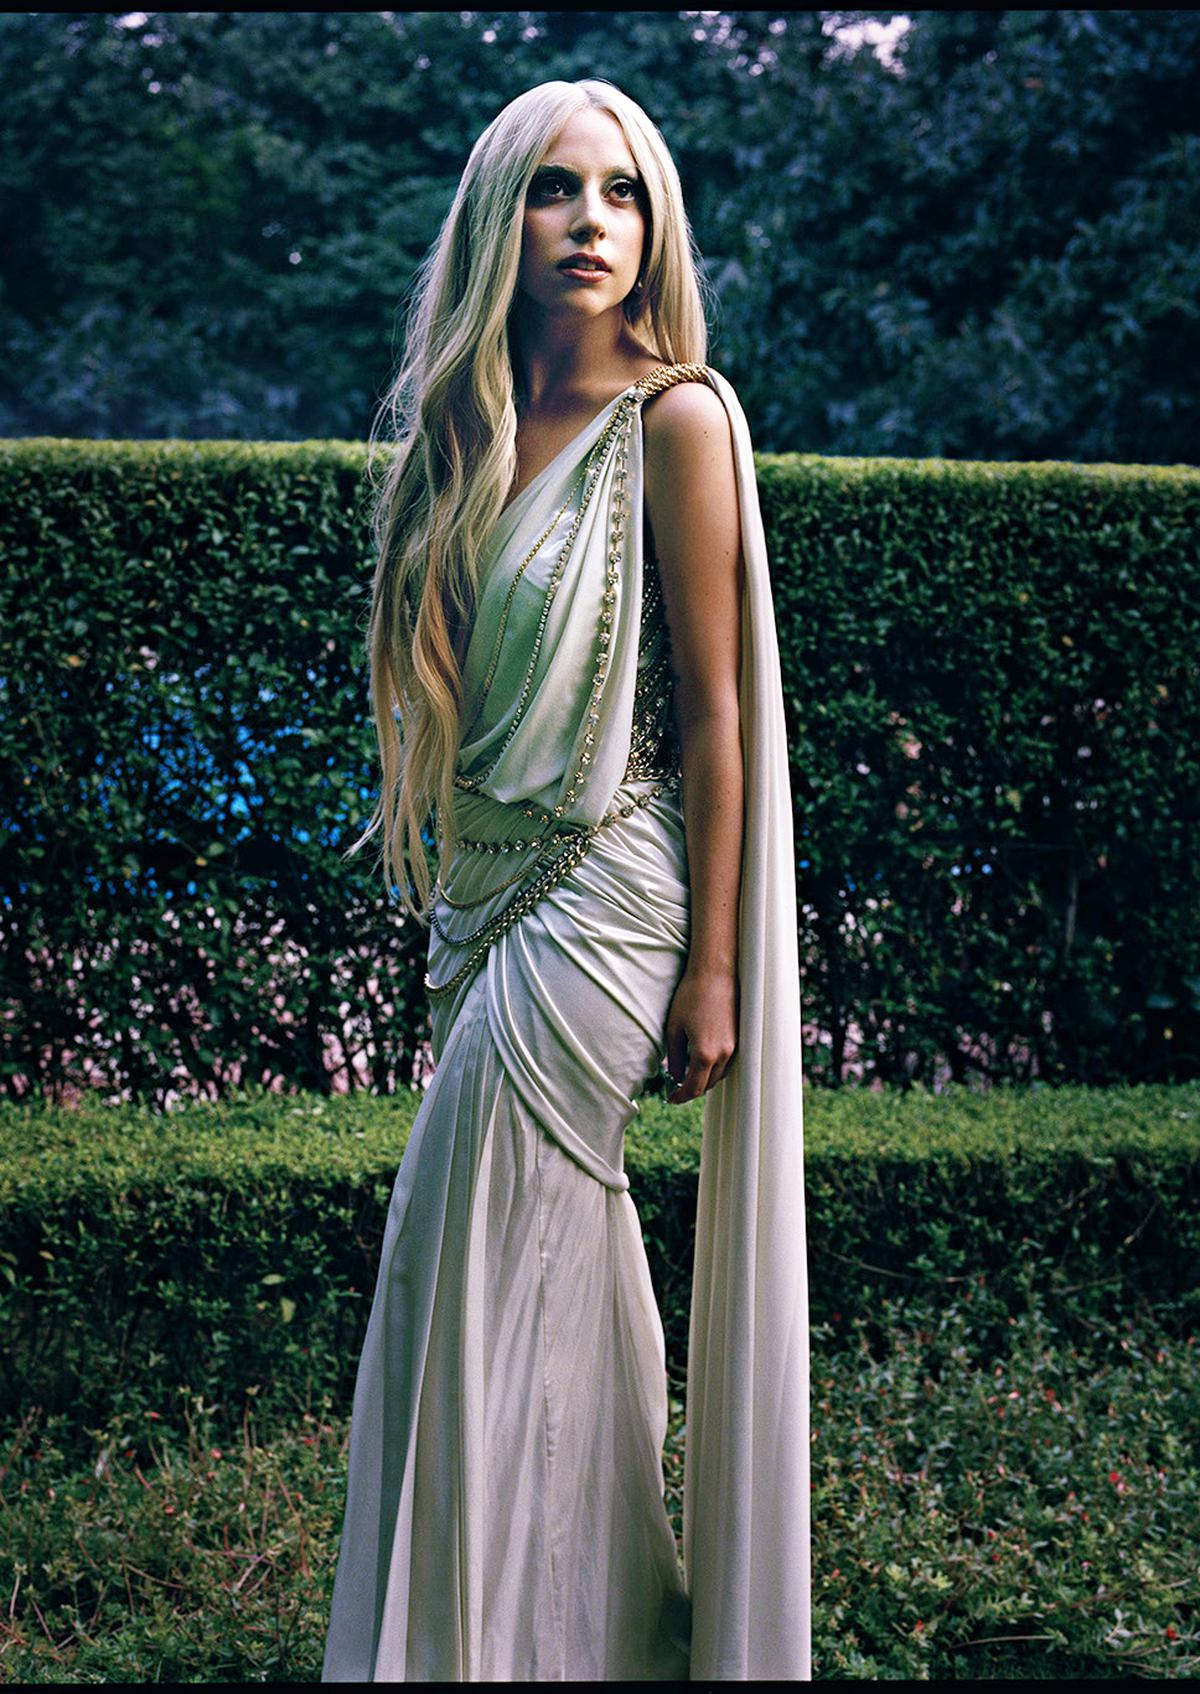 Lady Gaga in a TT drape saree for a concert in India